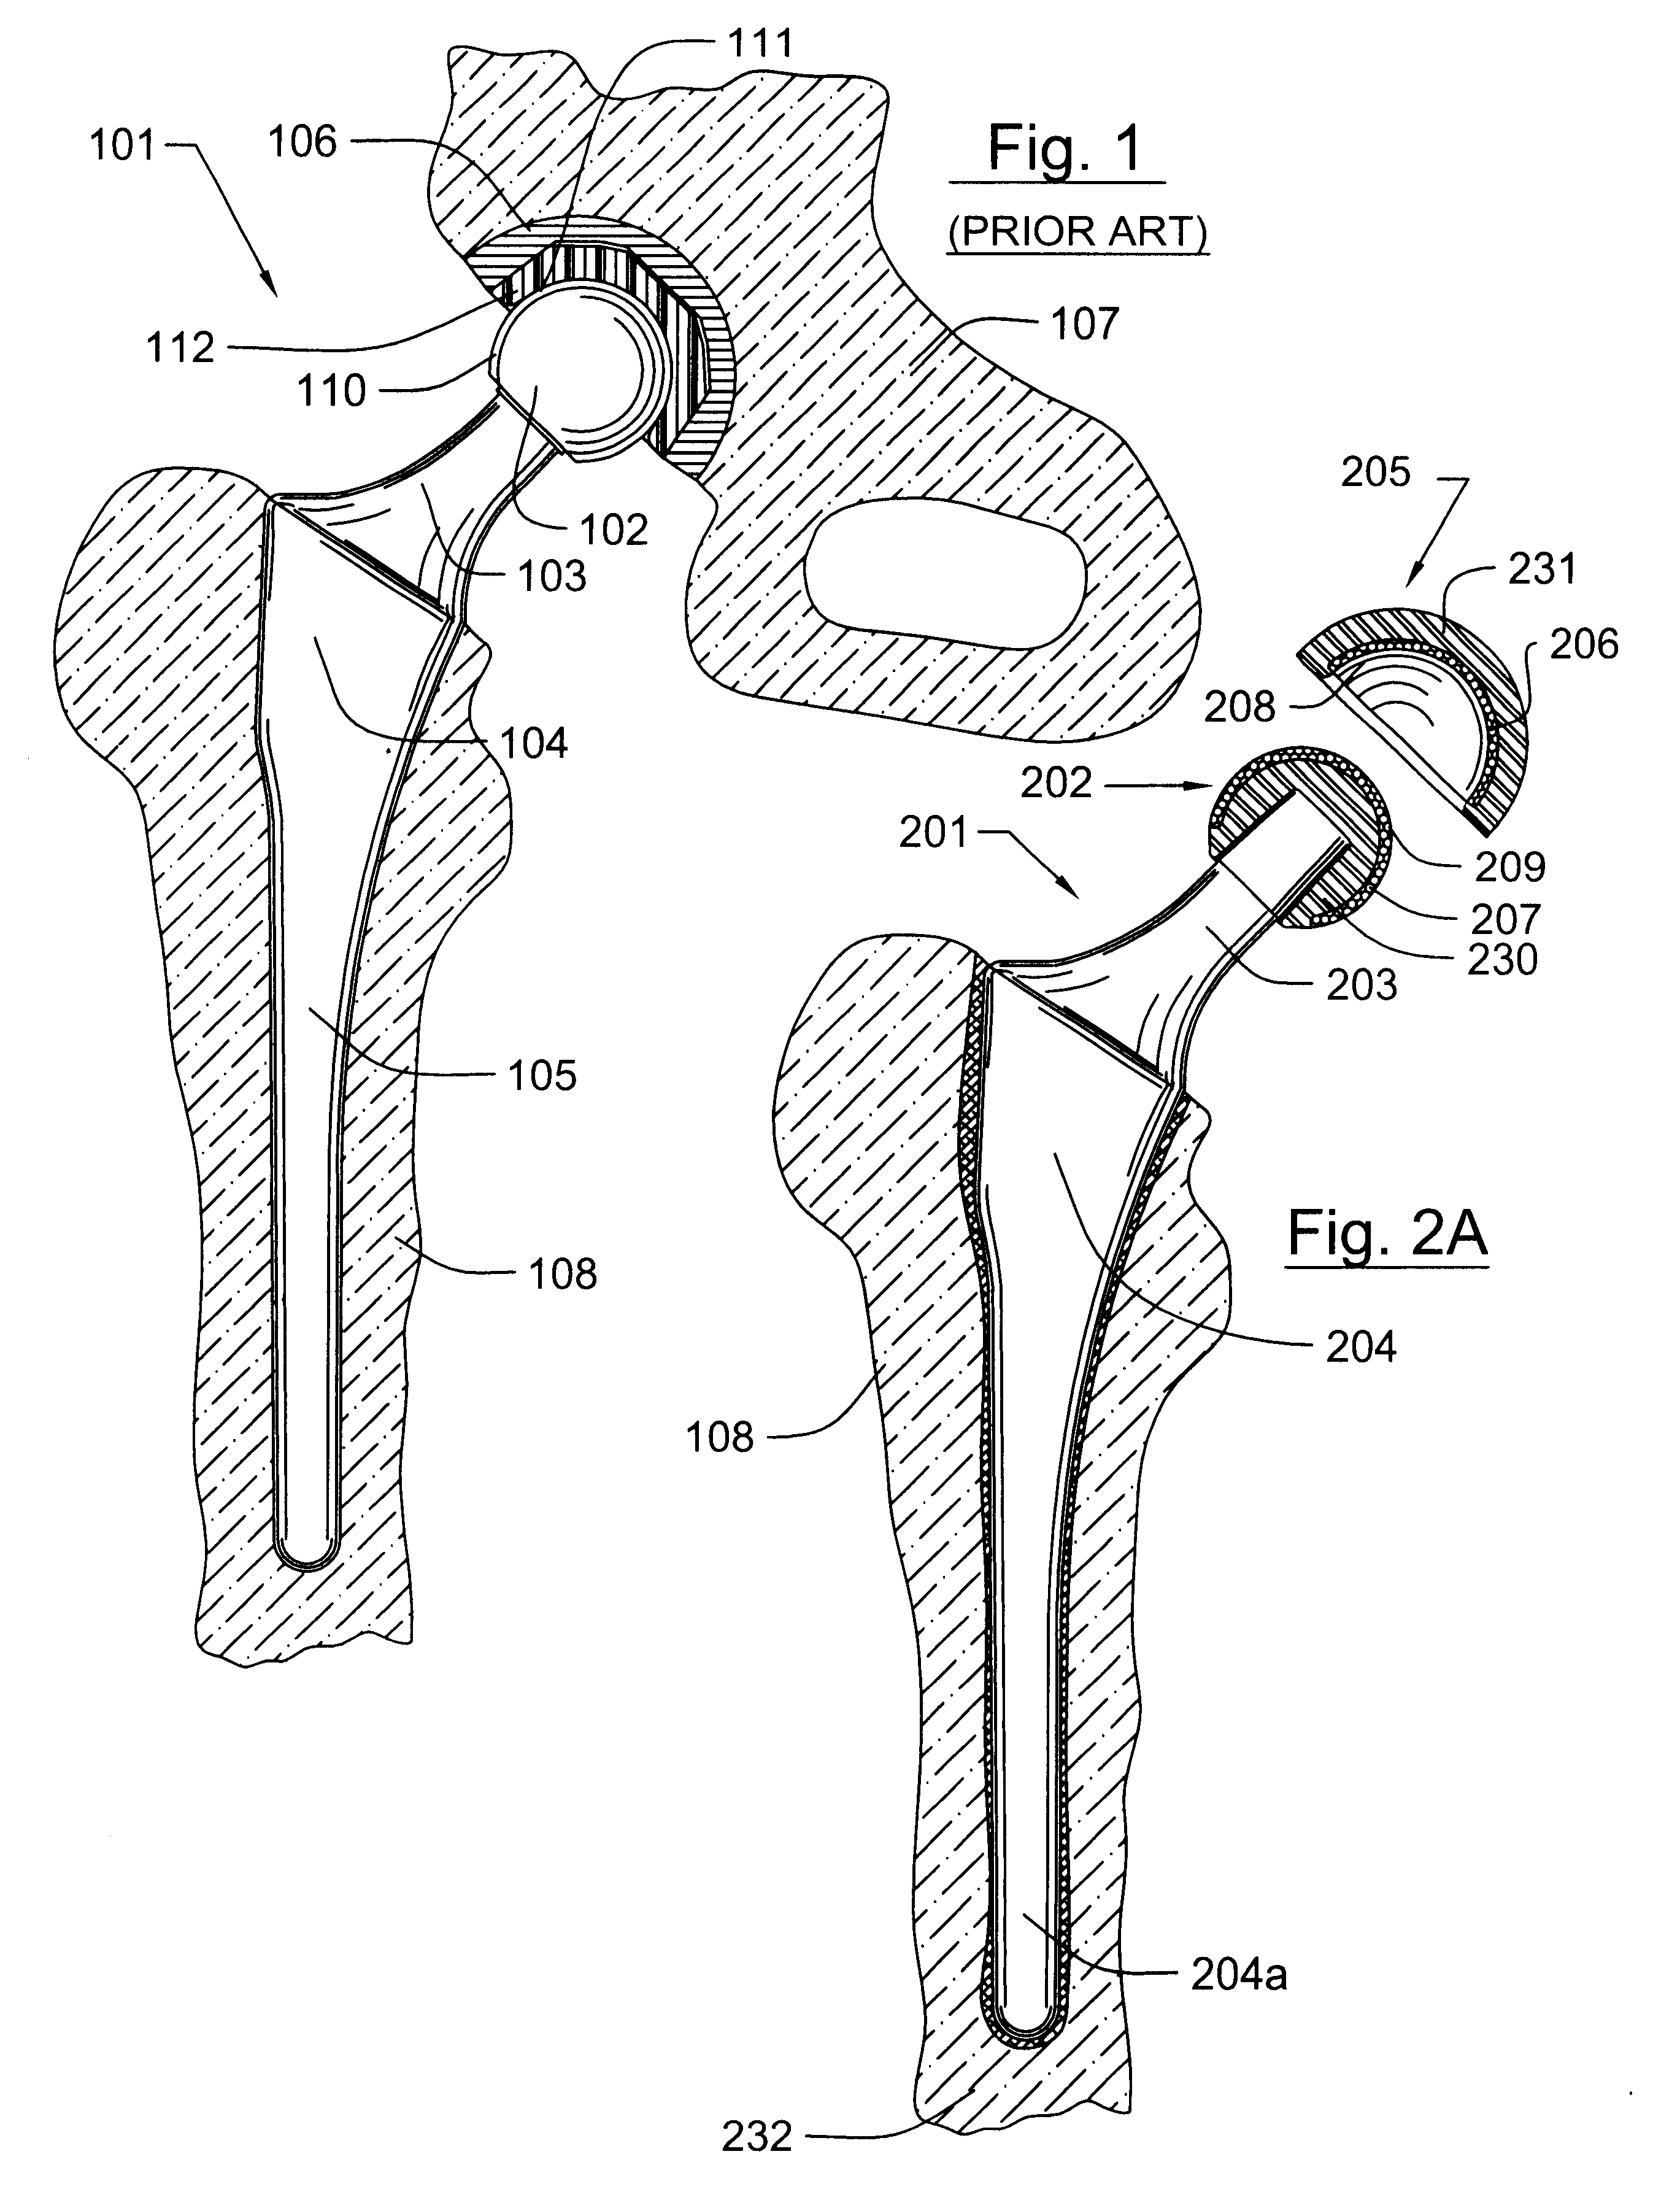 Methods for shaping and finishing prosthetic joint components including polycrystalline diamond compacts